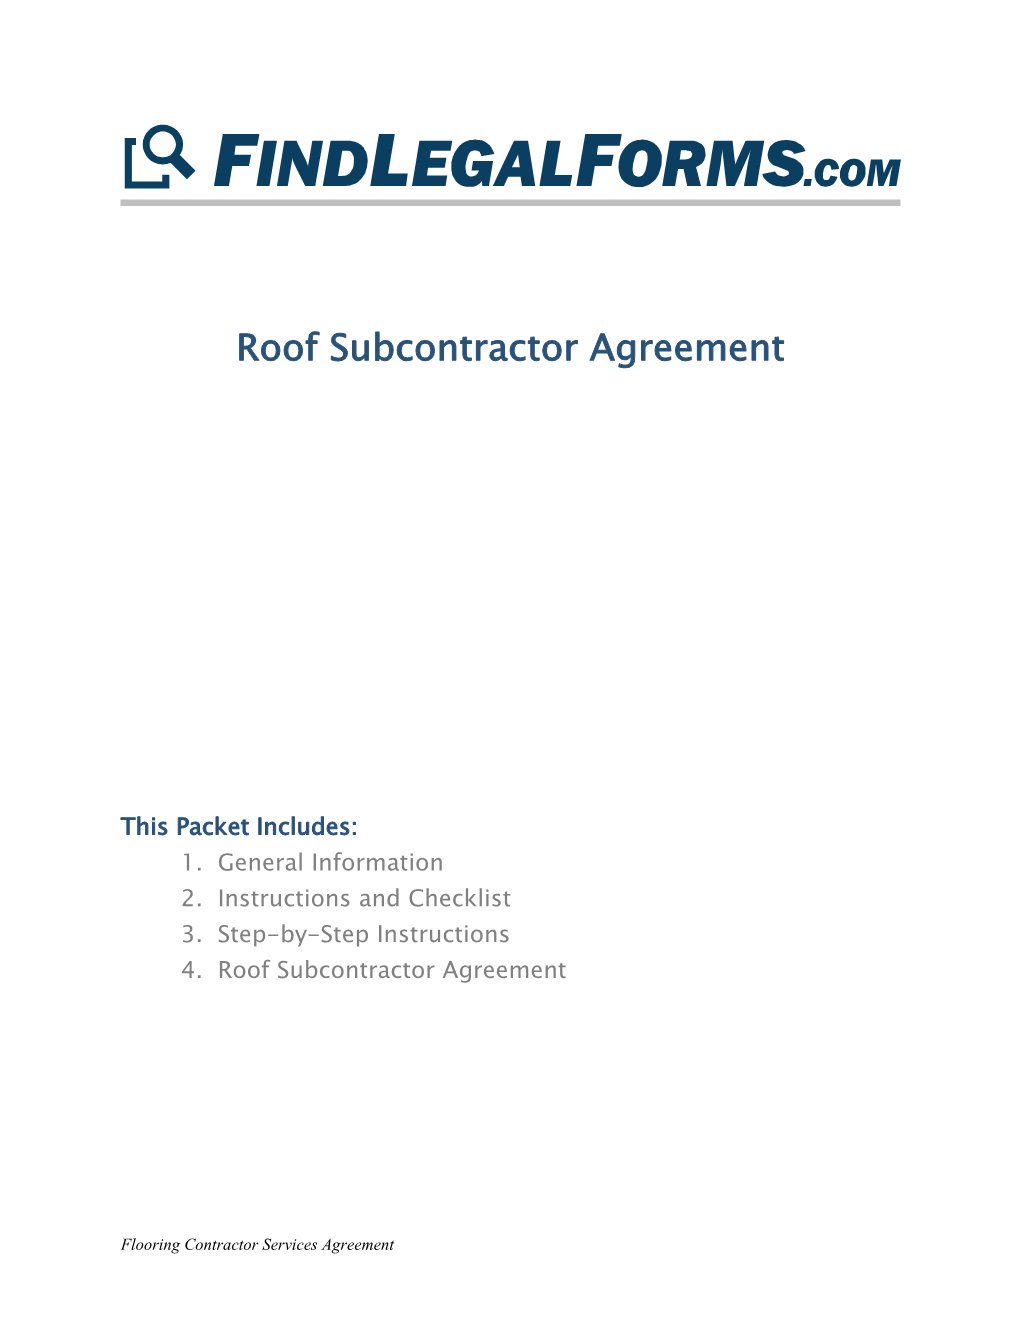 Roof Subcontractor Agreement